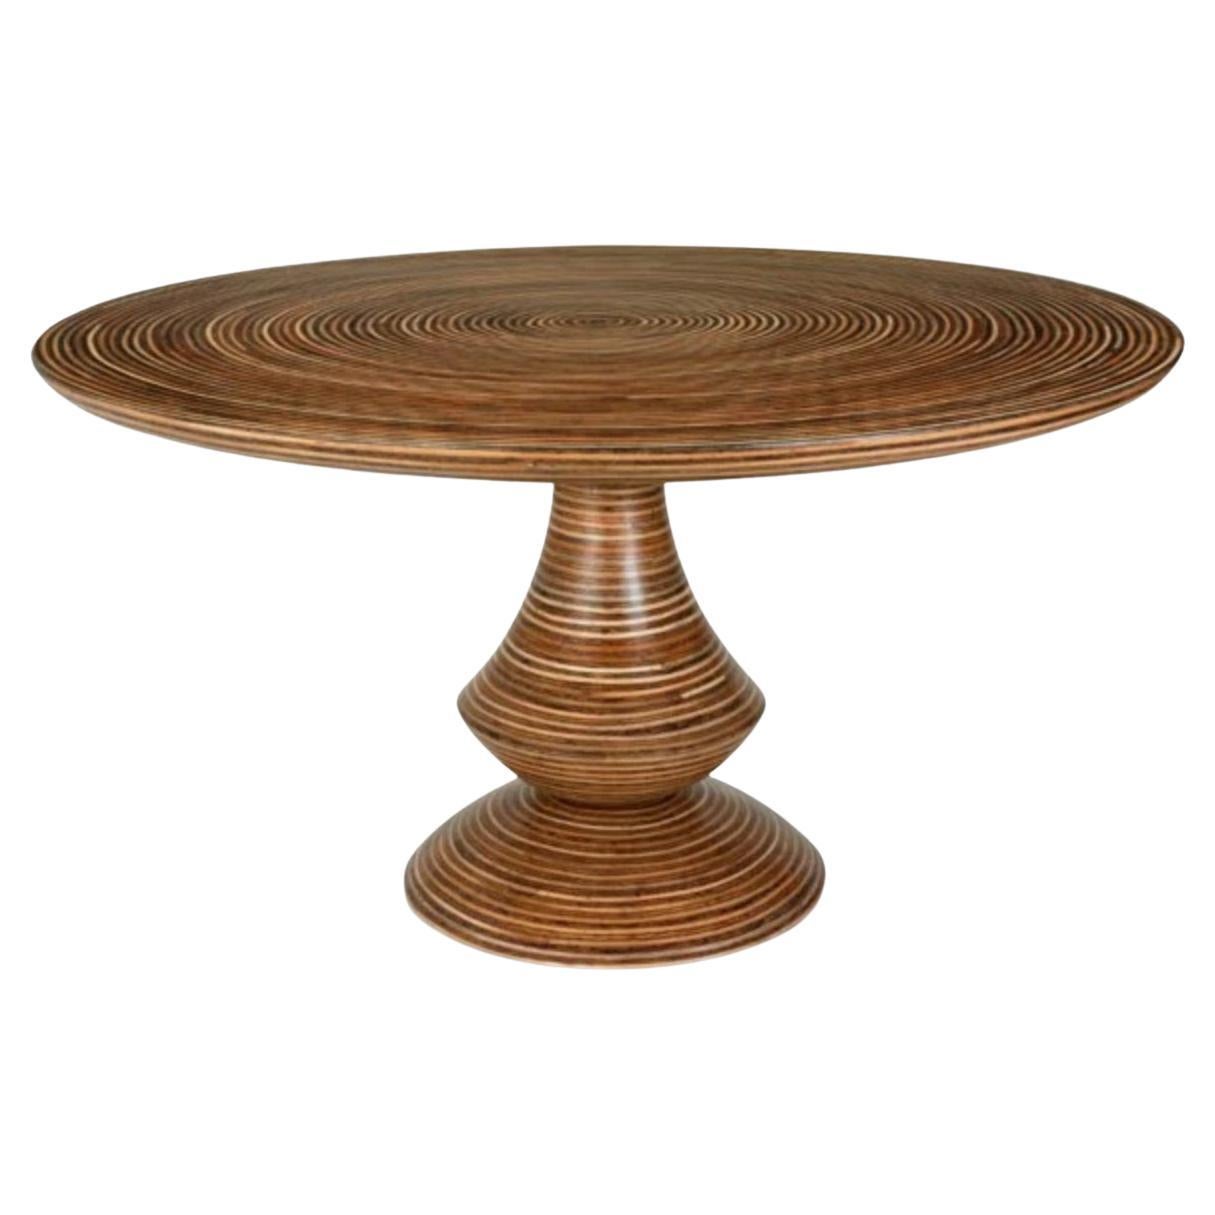 Showtime Rose Round Dining Table For Sale